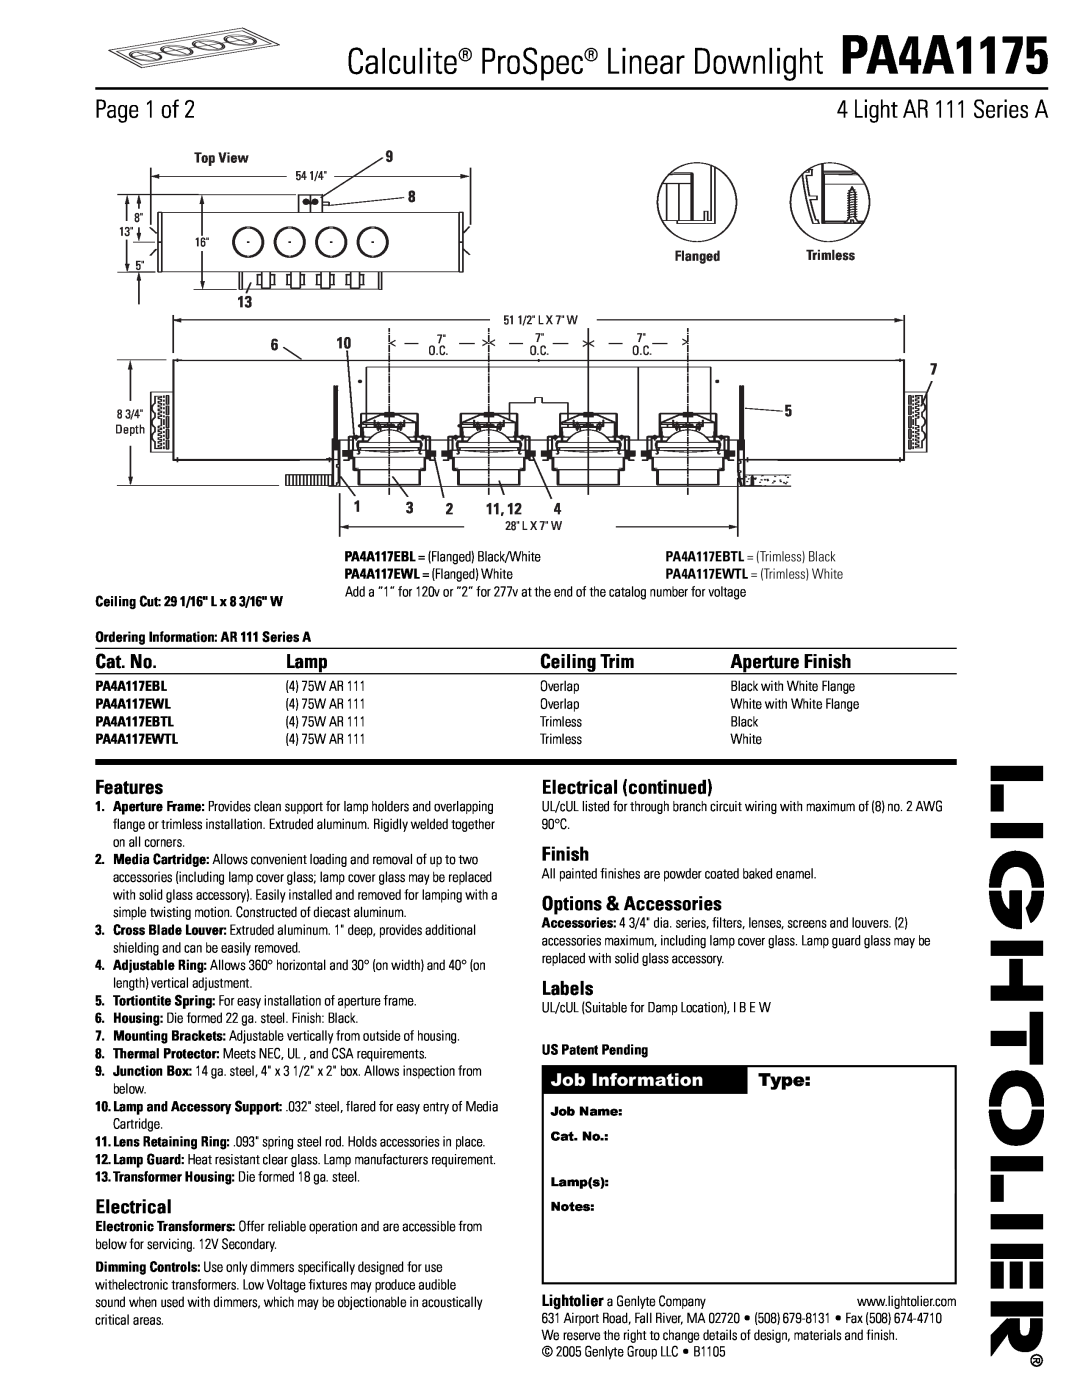 Lightolier manual Calculite ProSpec Linear Downlight PA4A1175, Page 1 of 